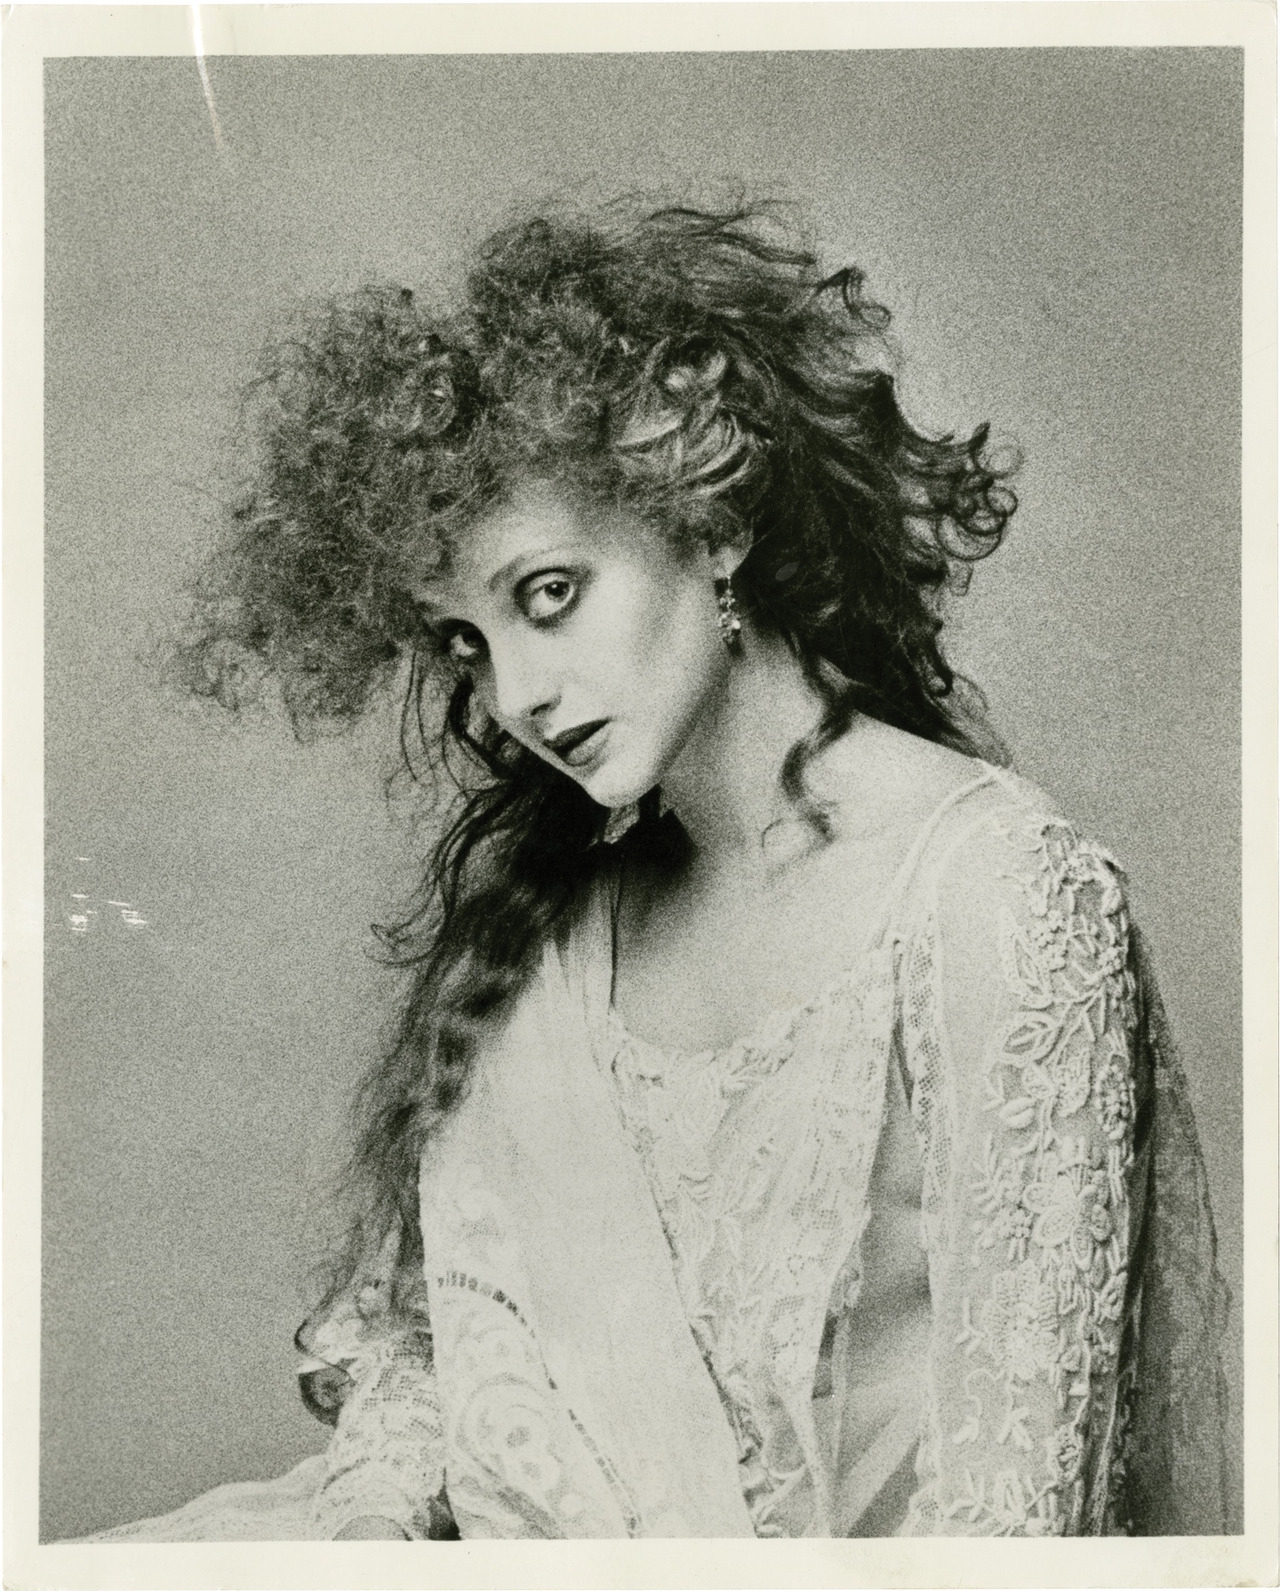 virginian-wolf-snake: Carol Kane, 1976 An agency memo on the verso of the first photograph